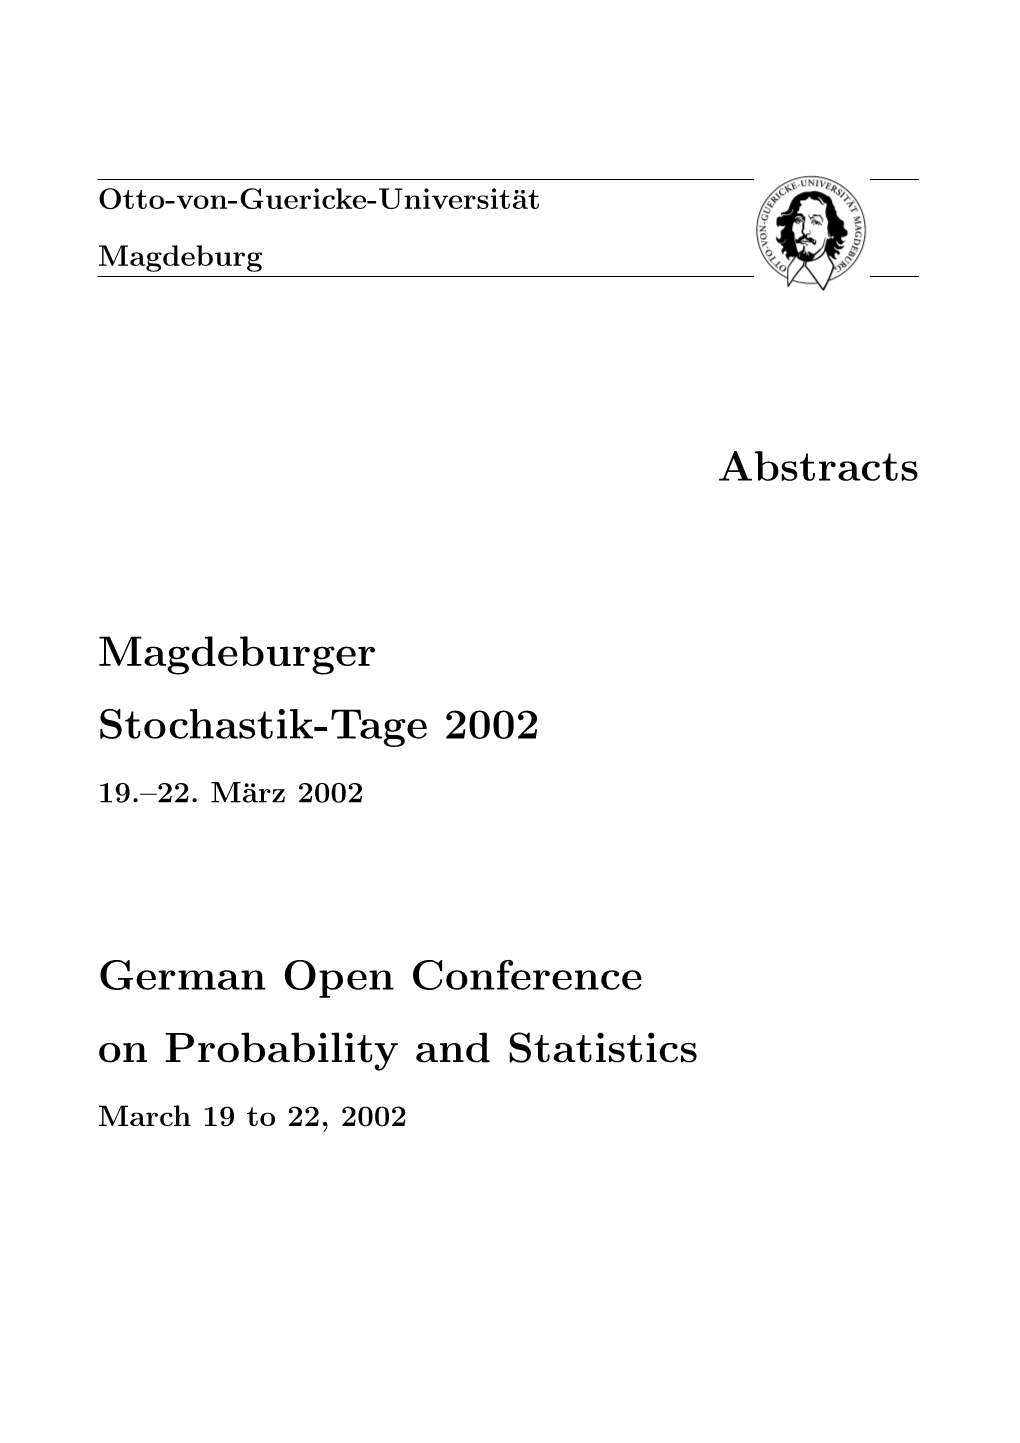 Abstracts Magdeburger Stochastik-Tage 2002 German Open Conference on Probability and Statistics